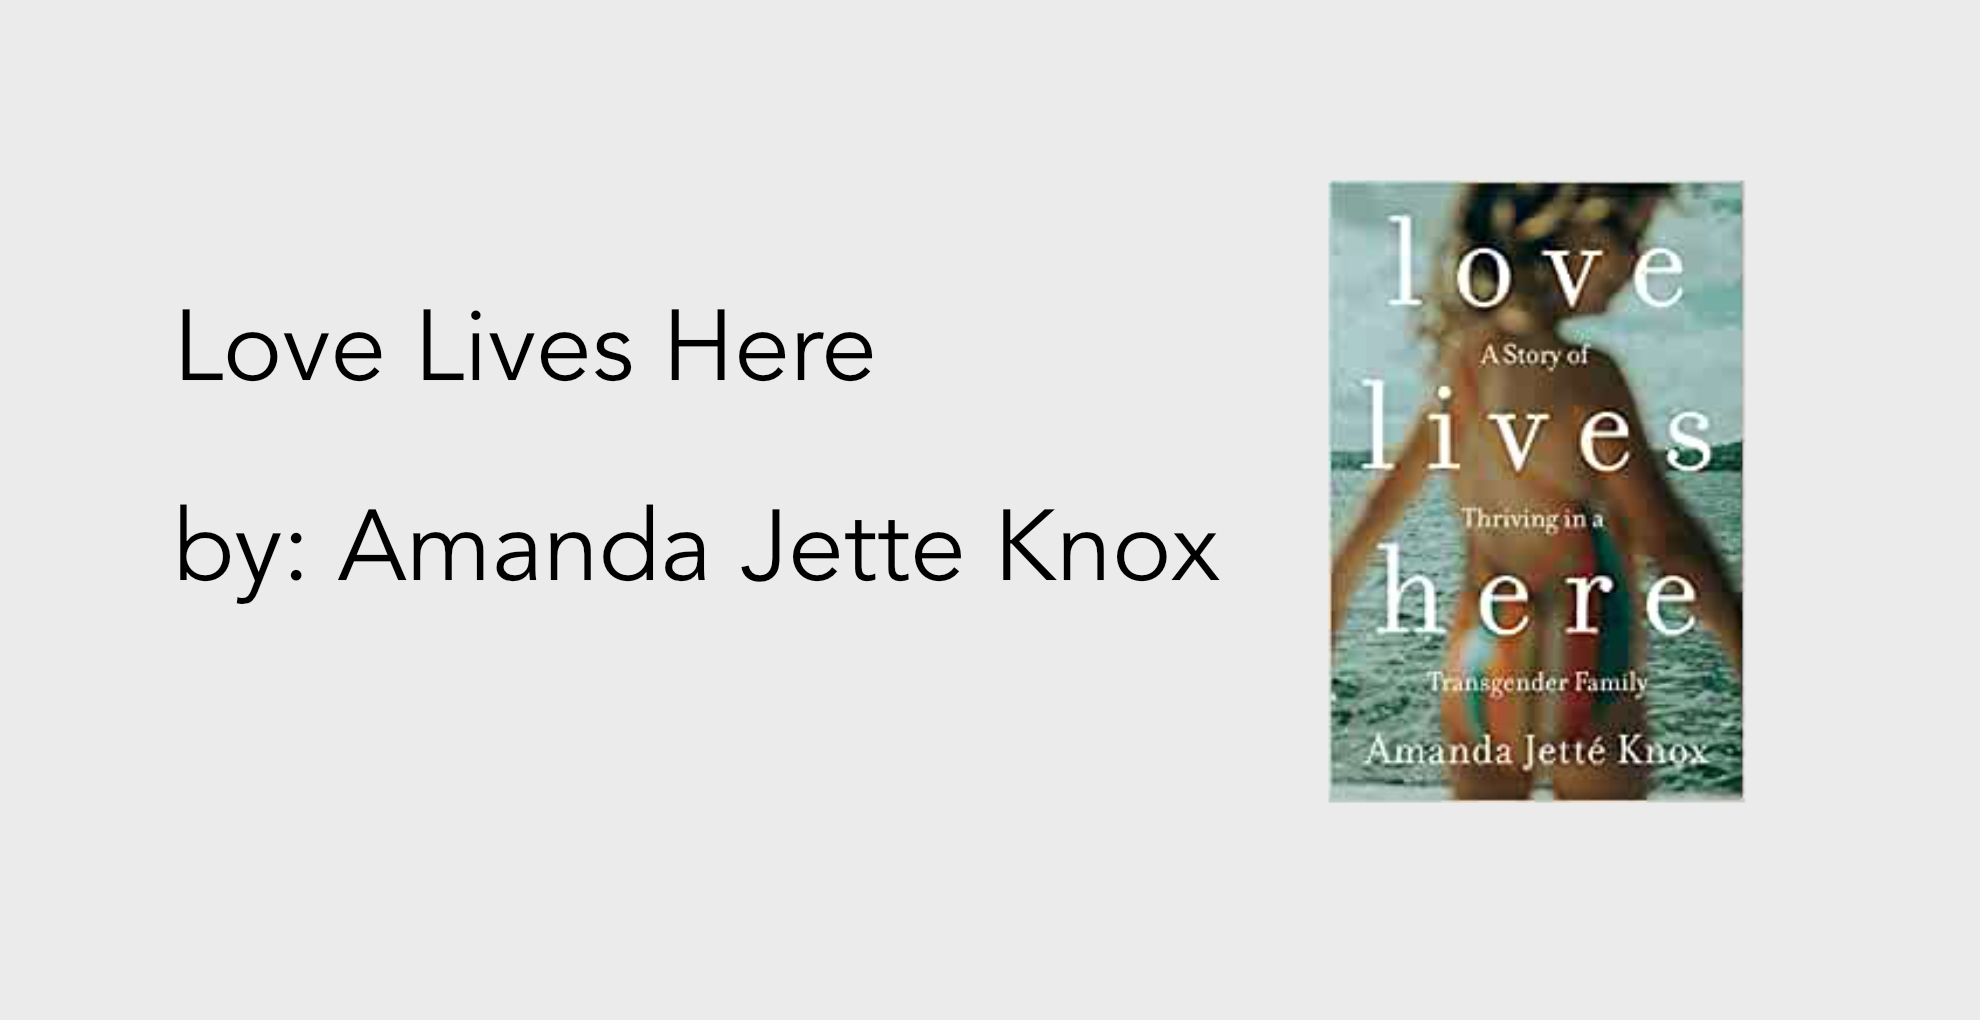 Love Lives Here by Amanda Jette Knox